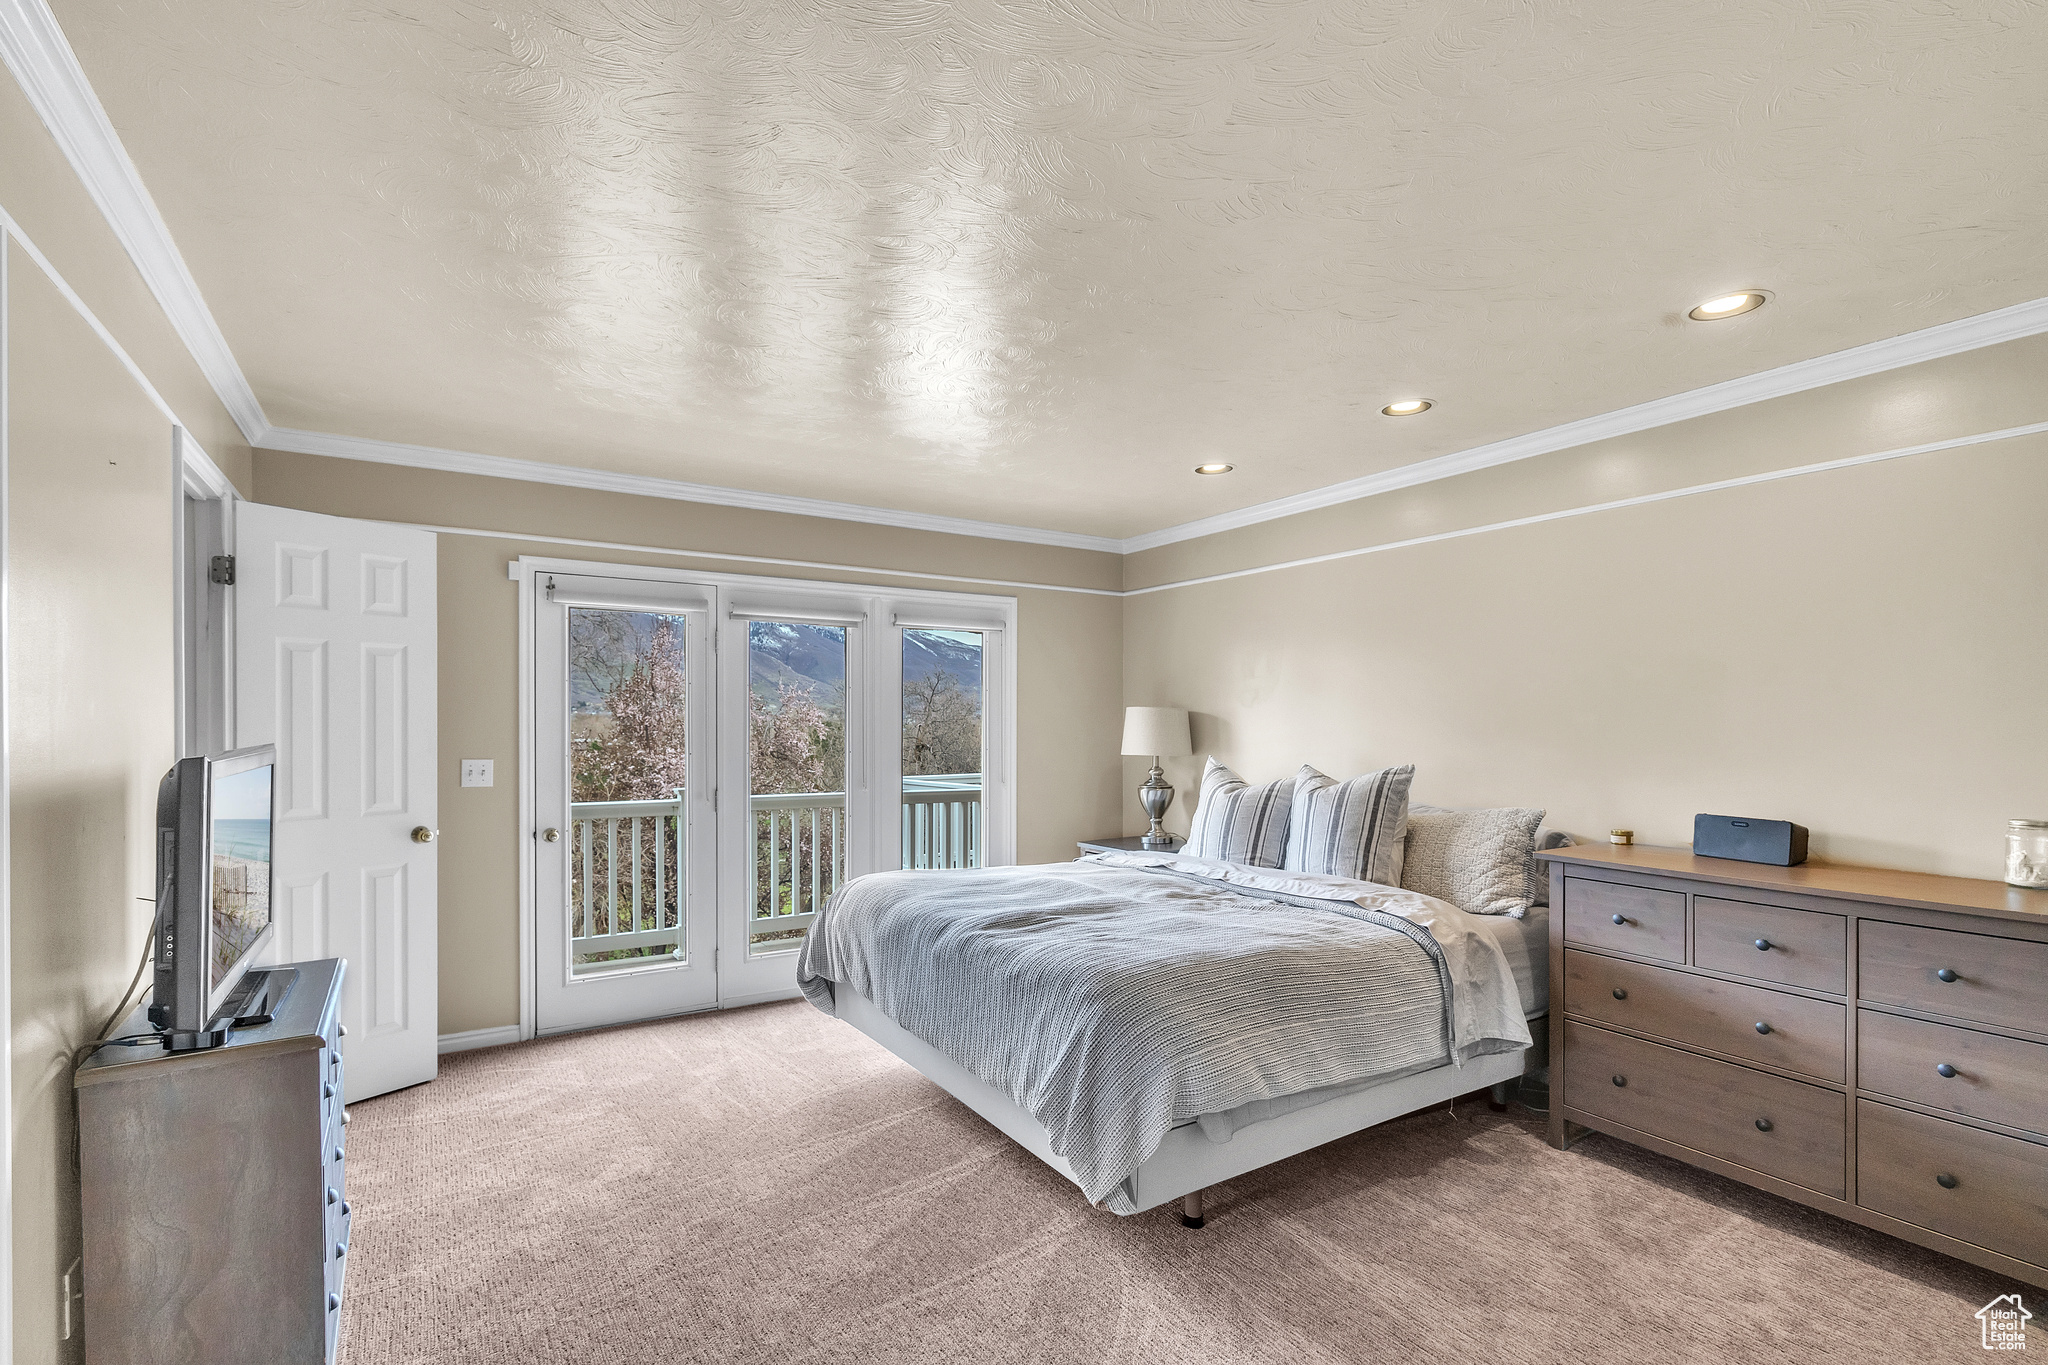 Bedroom featuring ornamental molding, light colored carpet, and access to exterior